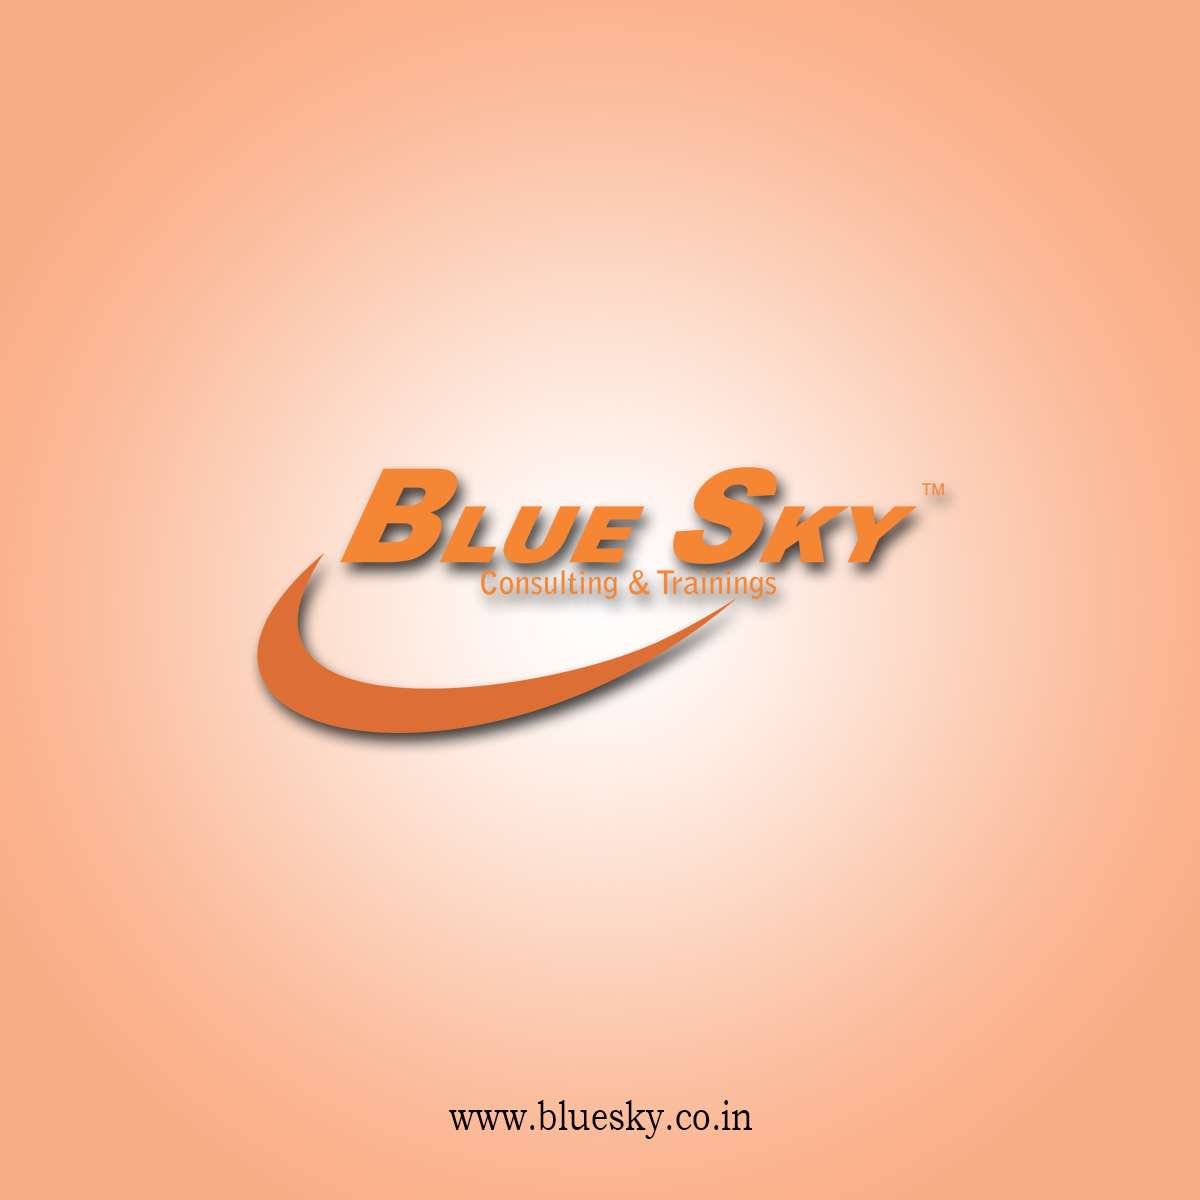 Blue Sky Consulting & Trainings